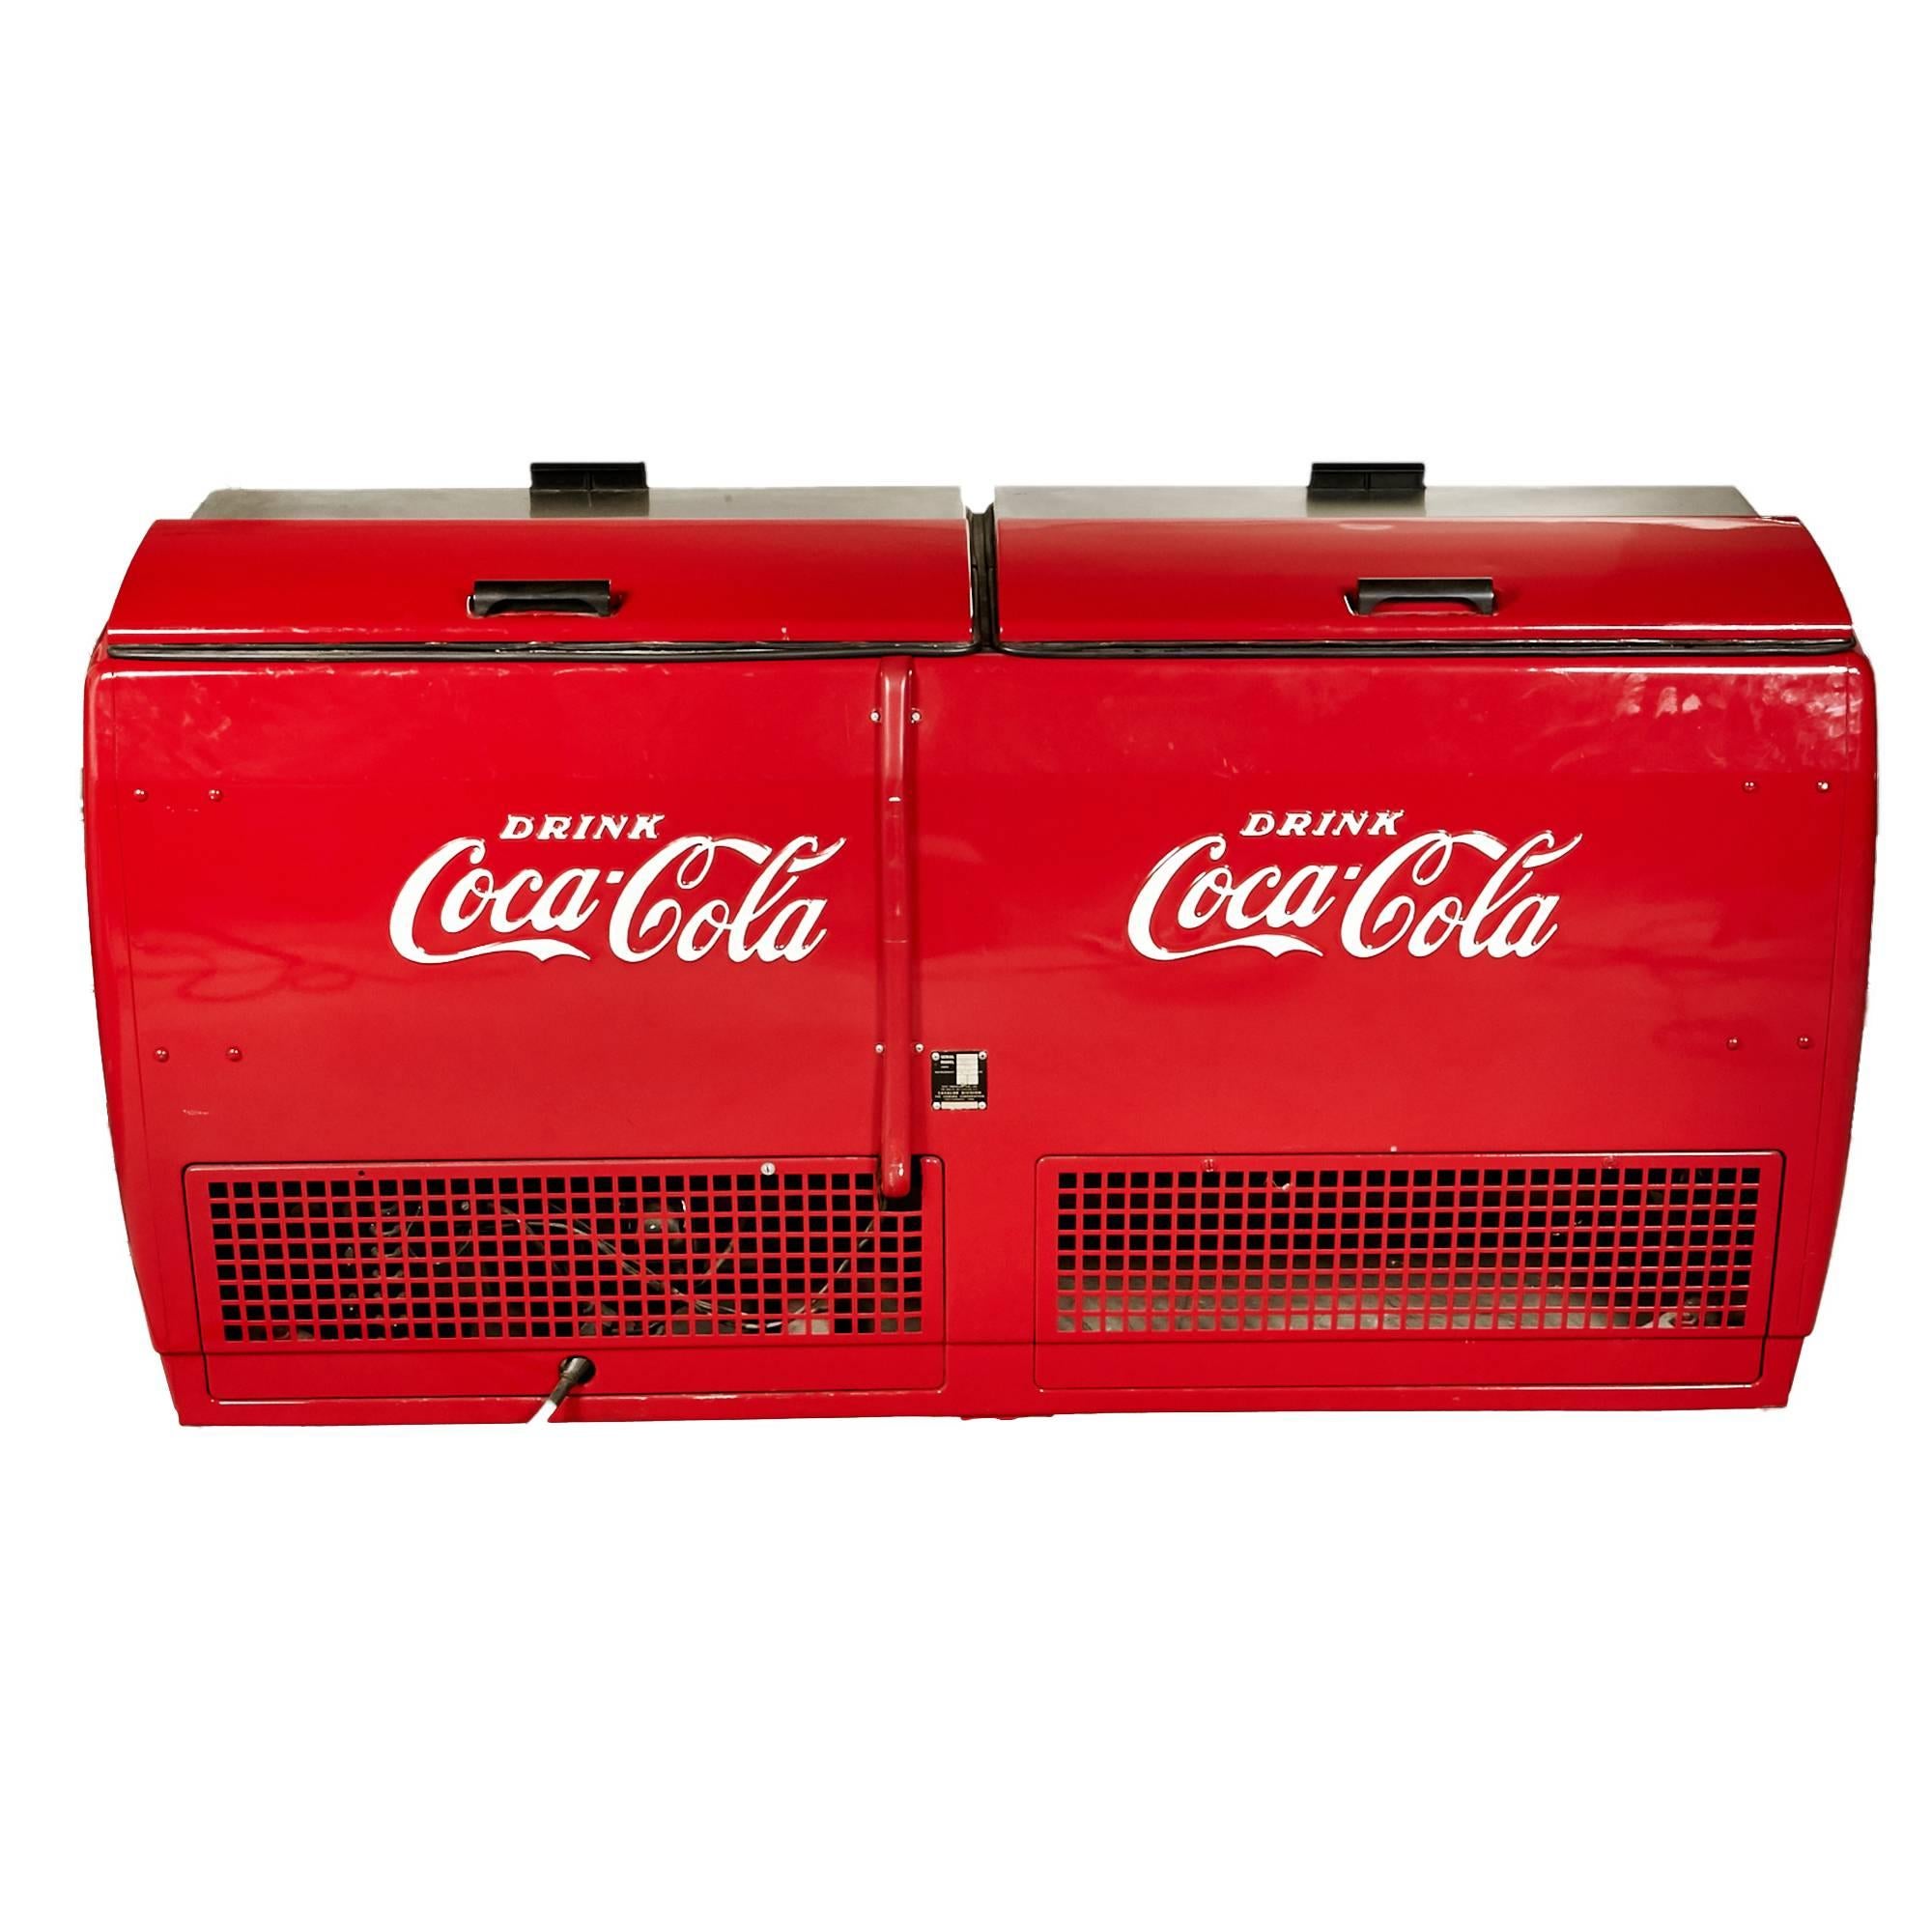 Late 1960s coca cola soda ice cold chest holds 22 cases of soda and is in working condition. The chest was restored about 10 years ago with a new compressor, cord and fully re-wired. The chest loads from the top and has a soda cap remover in front.